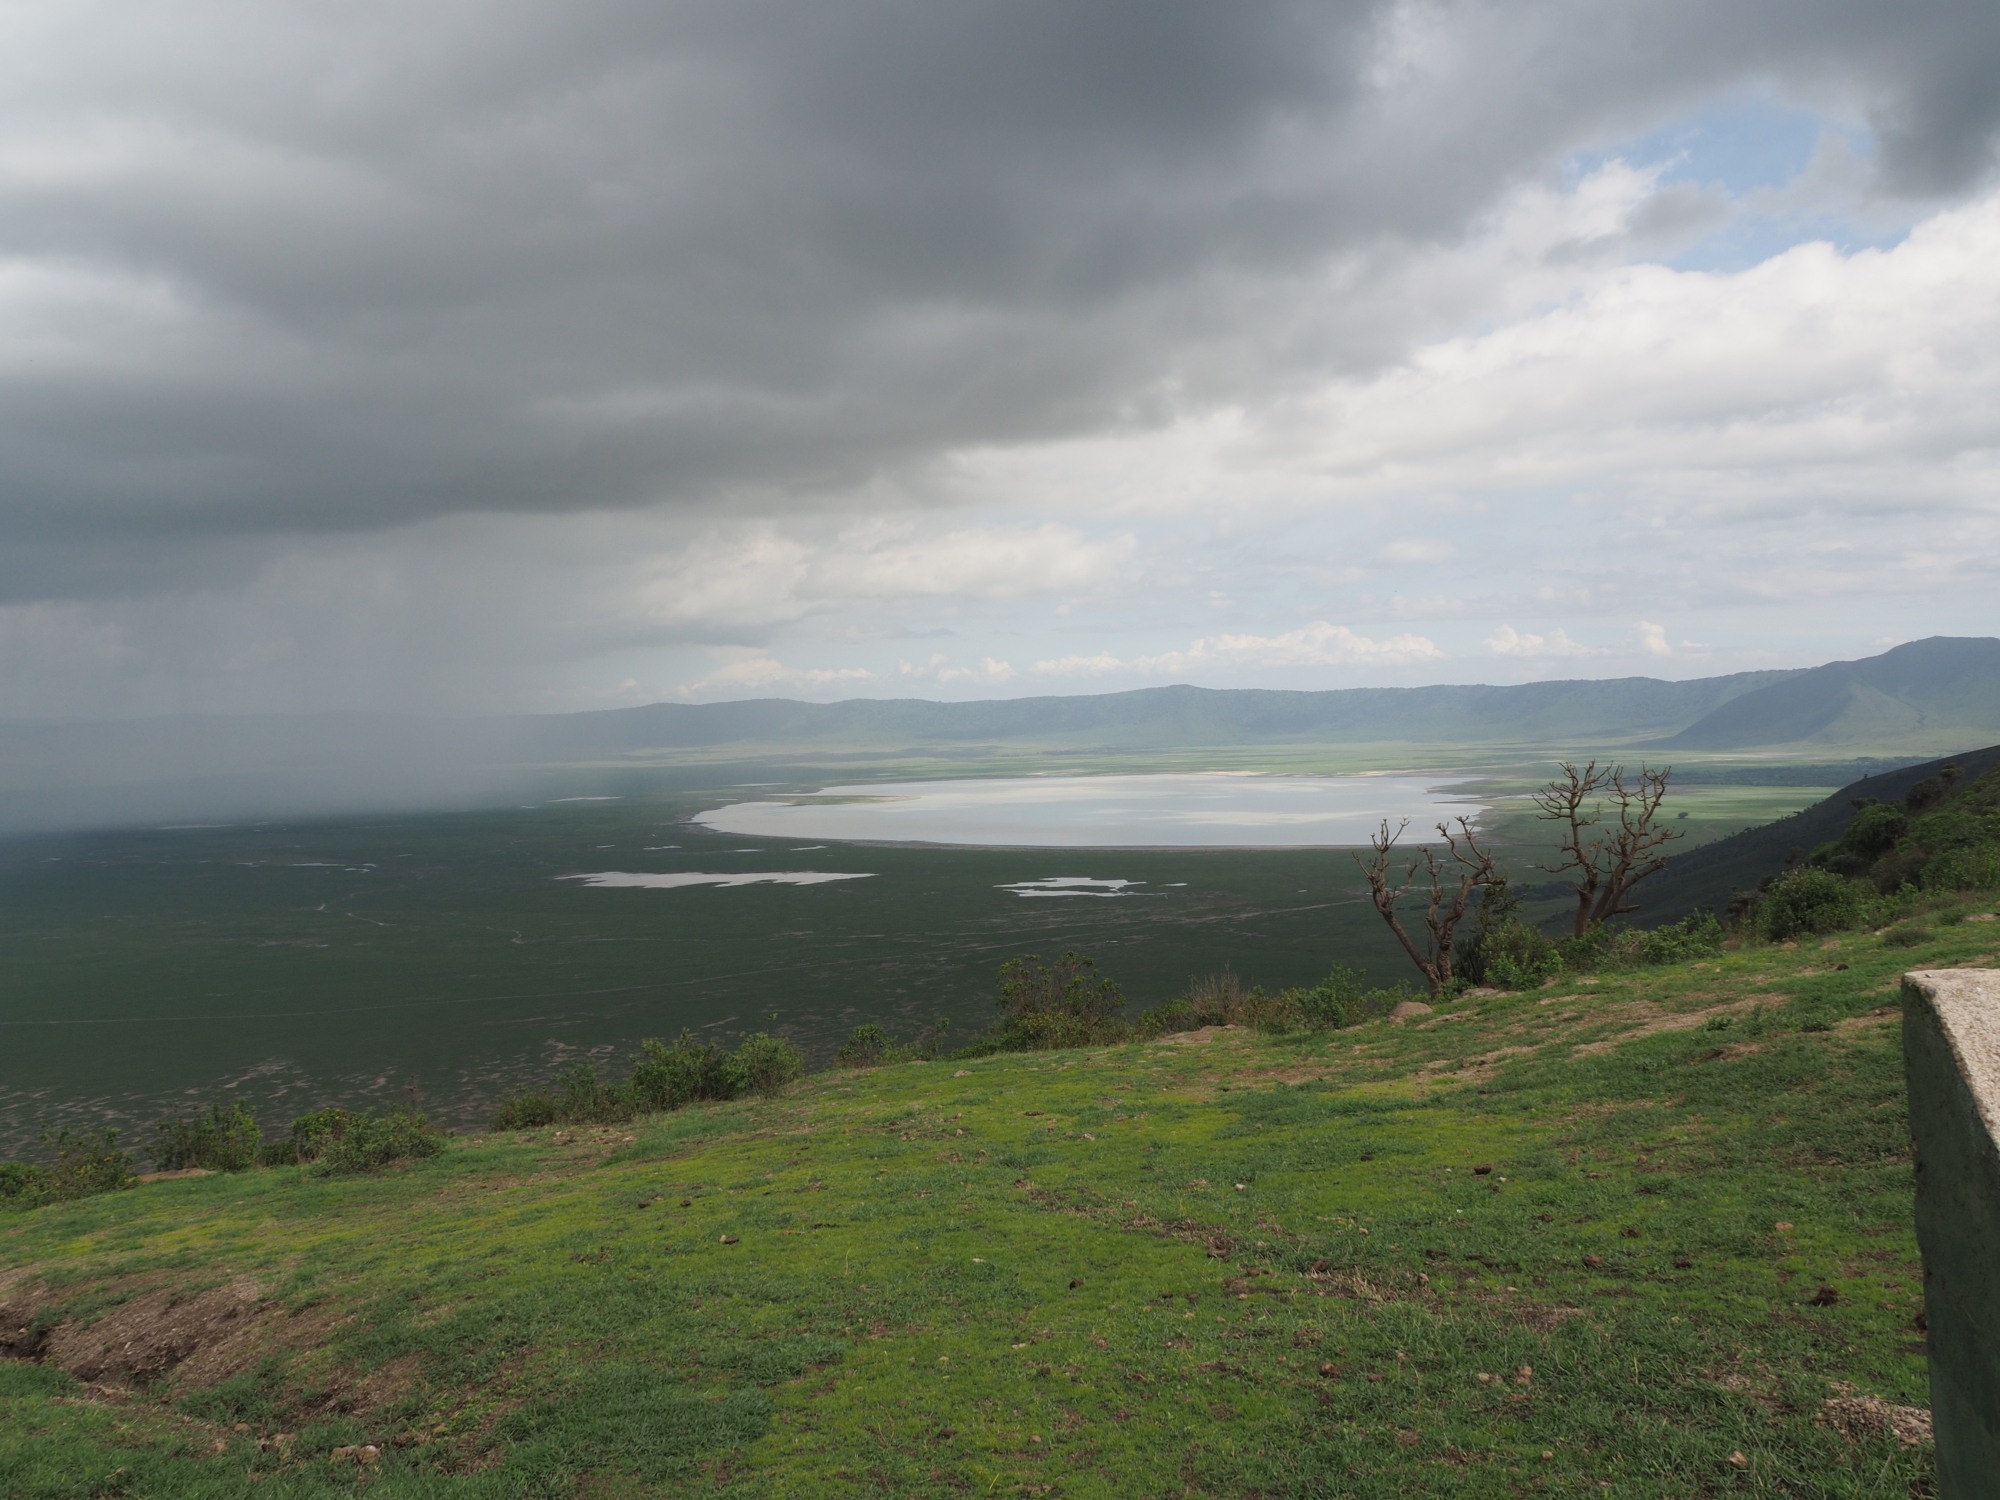 The Ngorongoro crater is about 20km in diameter. Those are the volcano walls surrounding the crater.